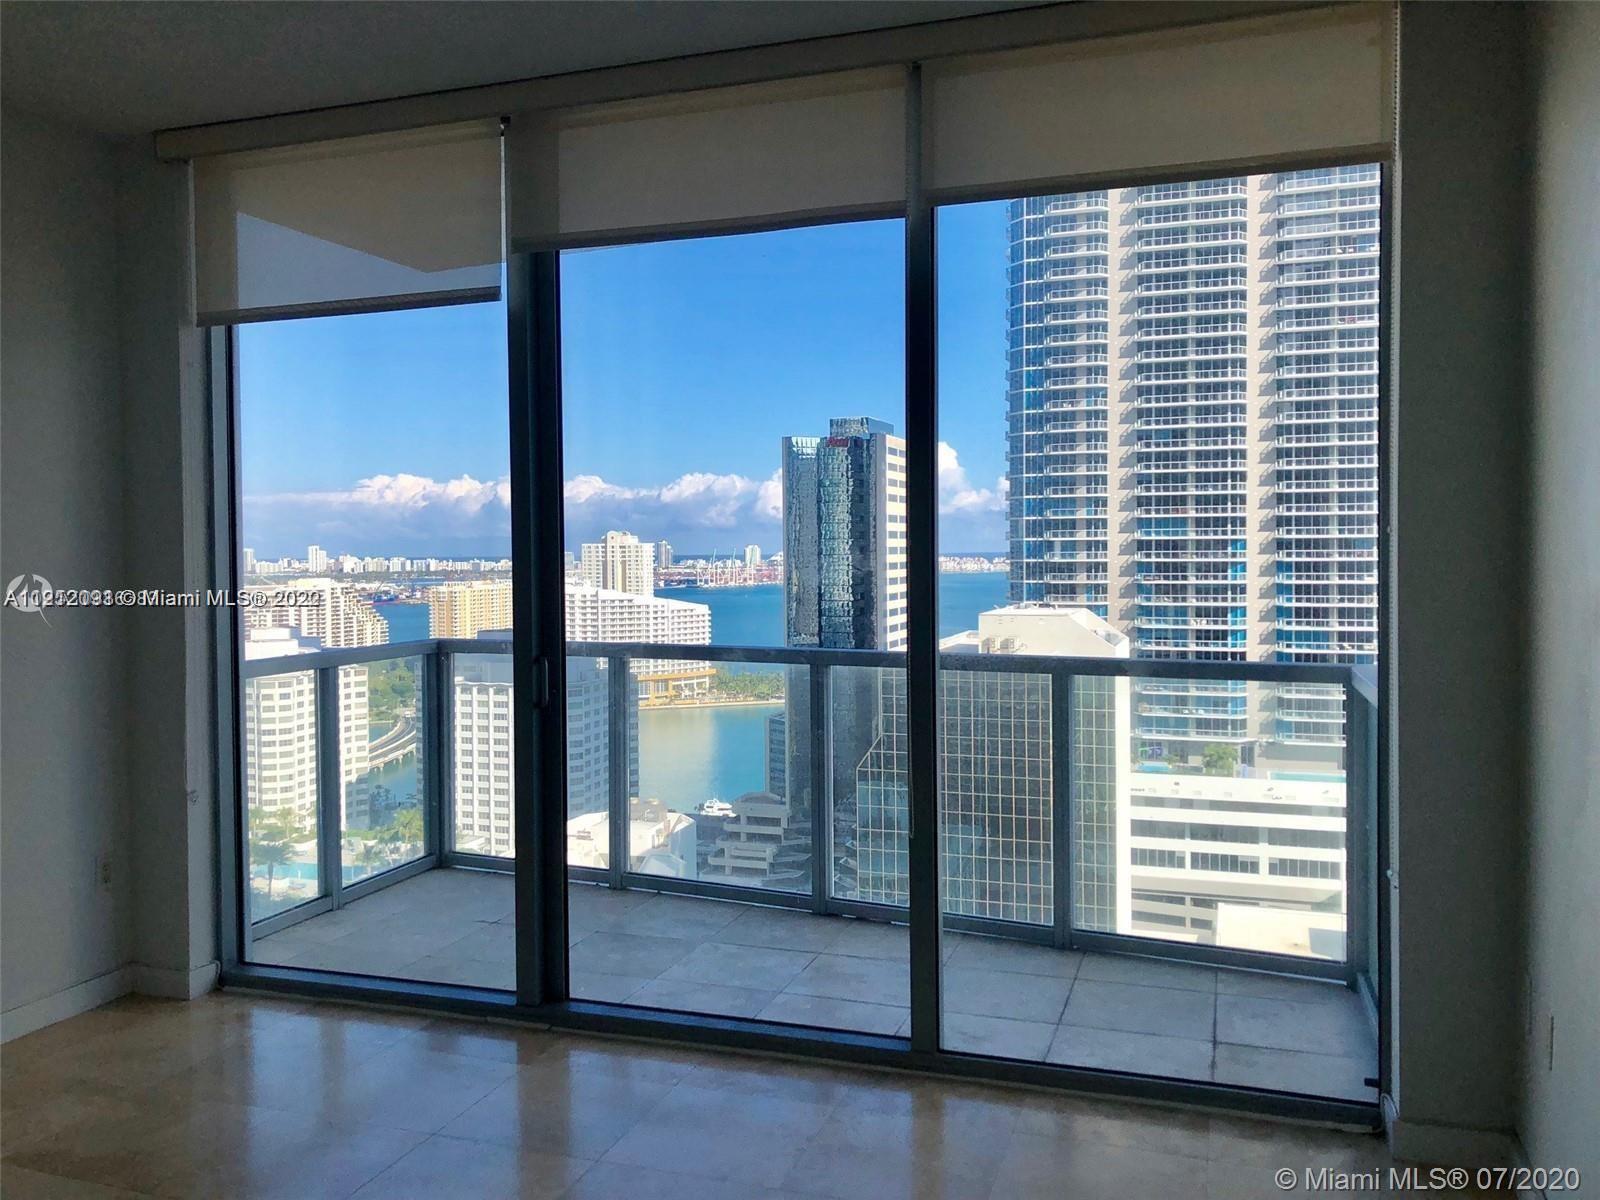 Rarely available! Largest one bedroom layout in the desired 1060 Brickell building with incredible bay and city views! This 1/1.5 unit offers an extremely spacious living room, bedroom, and open kitchen all overlooking Biscayne Bay and Brickell Ave. Building location is unbeatable- in the heart of Brickell, above great restaurants, bars, shops and Brickell City Centre. Amenities includes large pool, fitness center, event room, business room, golf simulator, massage room and more! Easy to show!